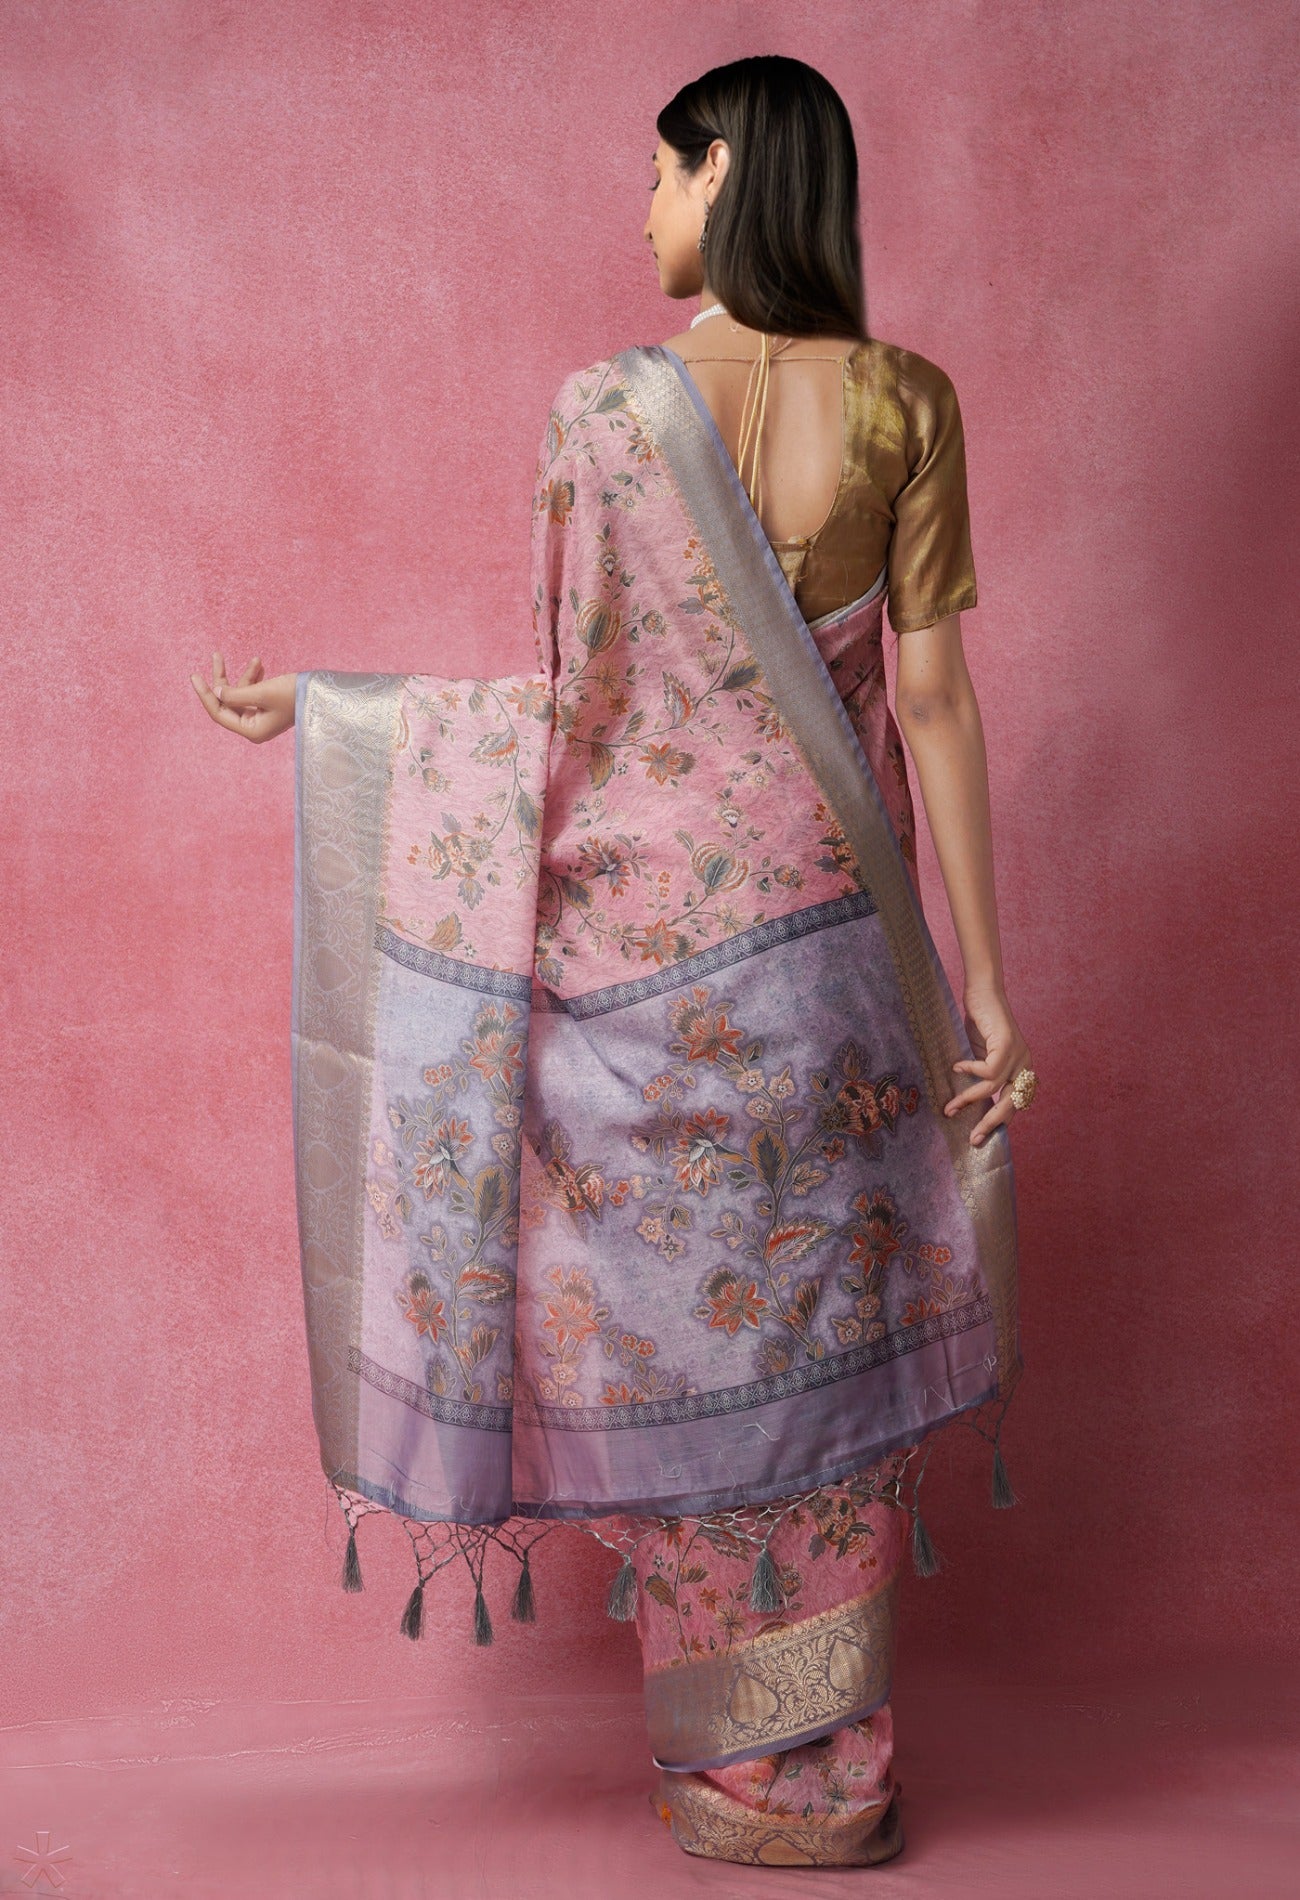 Online Shopping for Pink  Skin Printed Chanderi Sico Saree with Fancy/Ethnic Prints from Madhya Pradesh at Unnatisilks.com India
